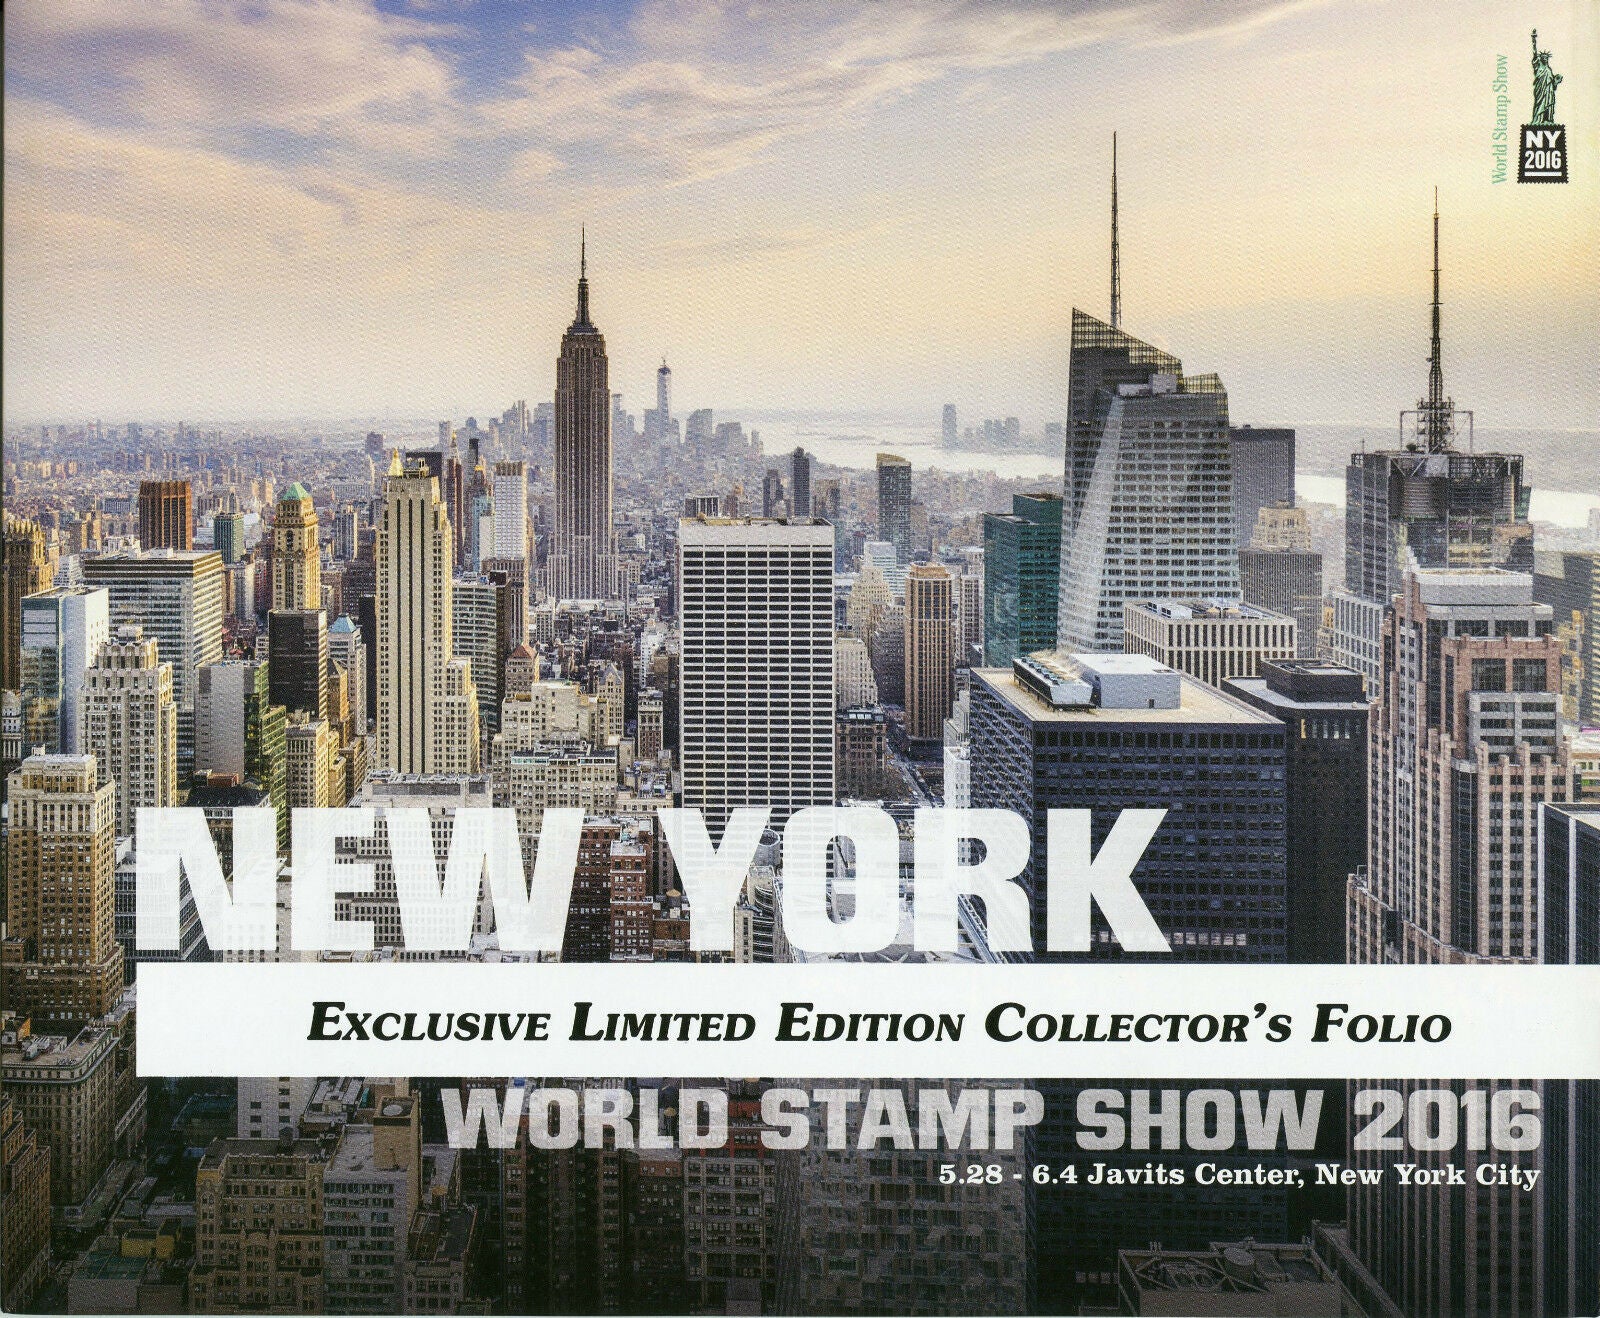 NY2016 New York World Stamp 2016 Excl Limited Ed Collectors Folio Skyline by Day